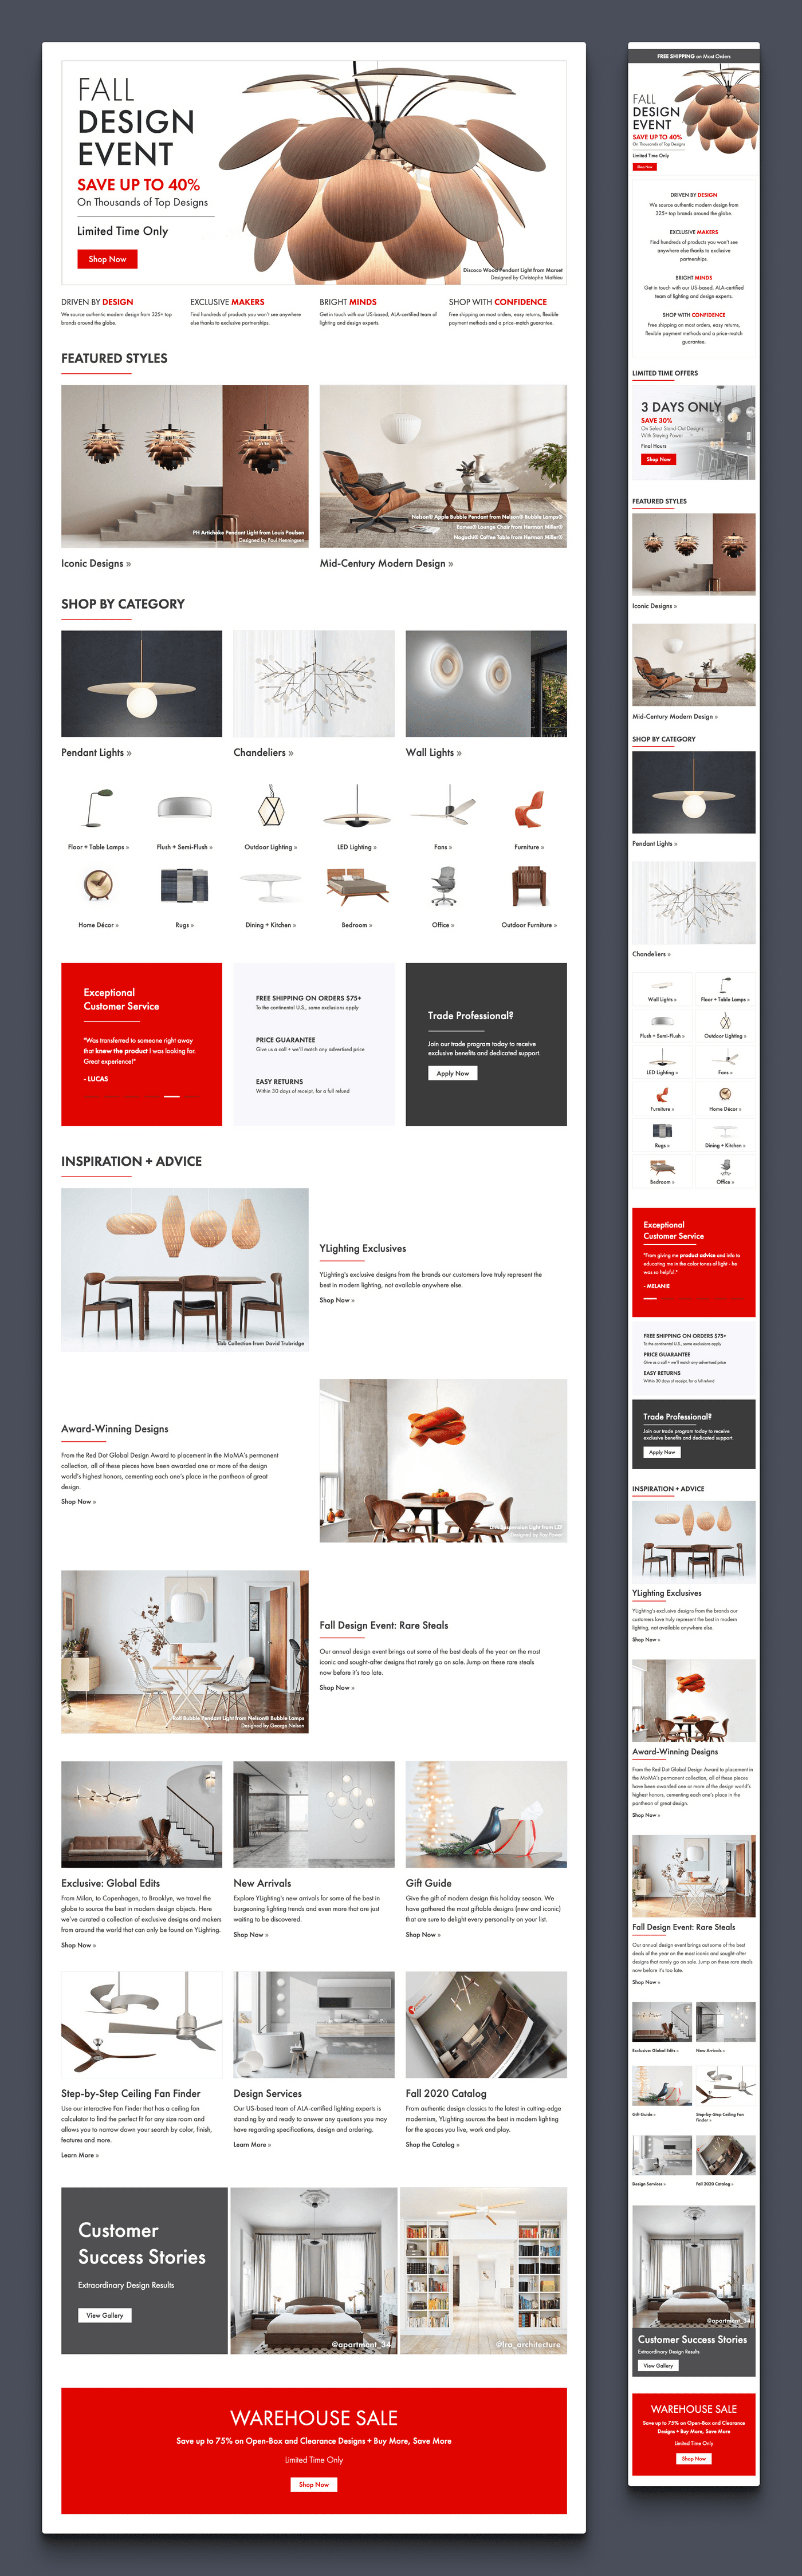 Full screenshot of the homepage design on desktop and mobile